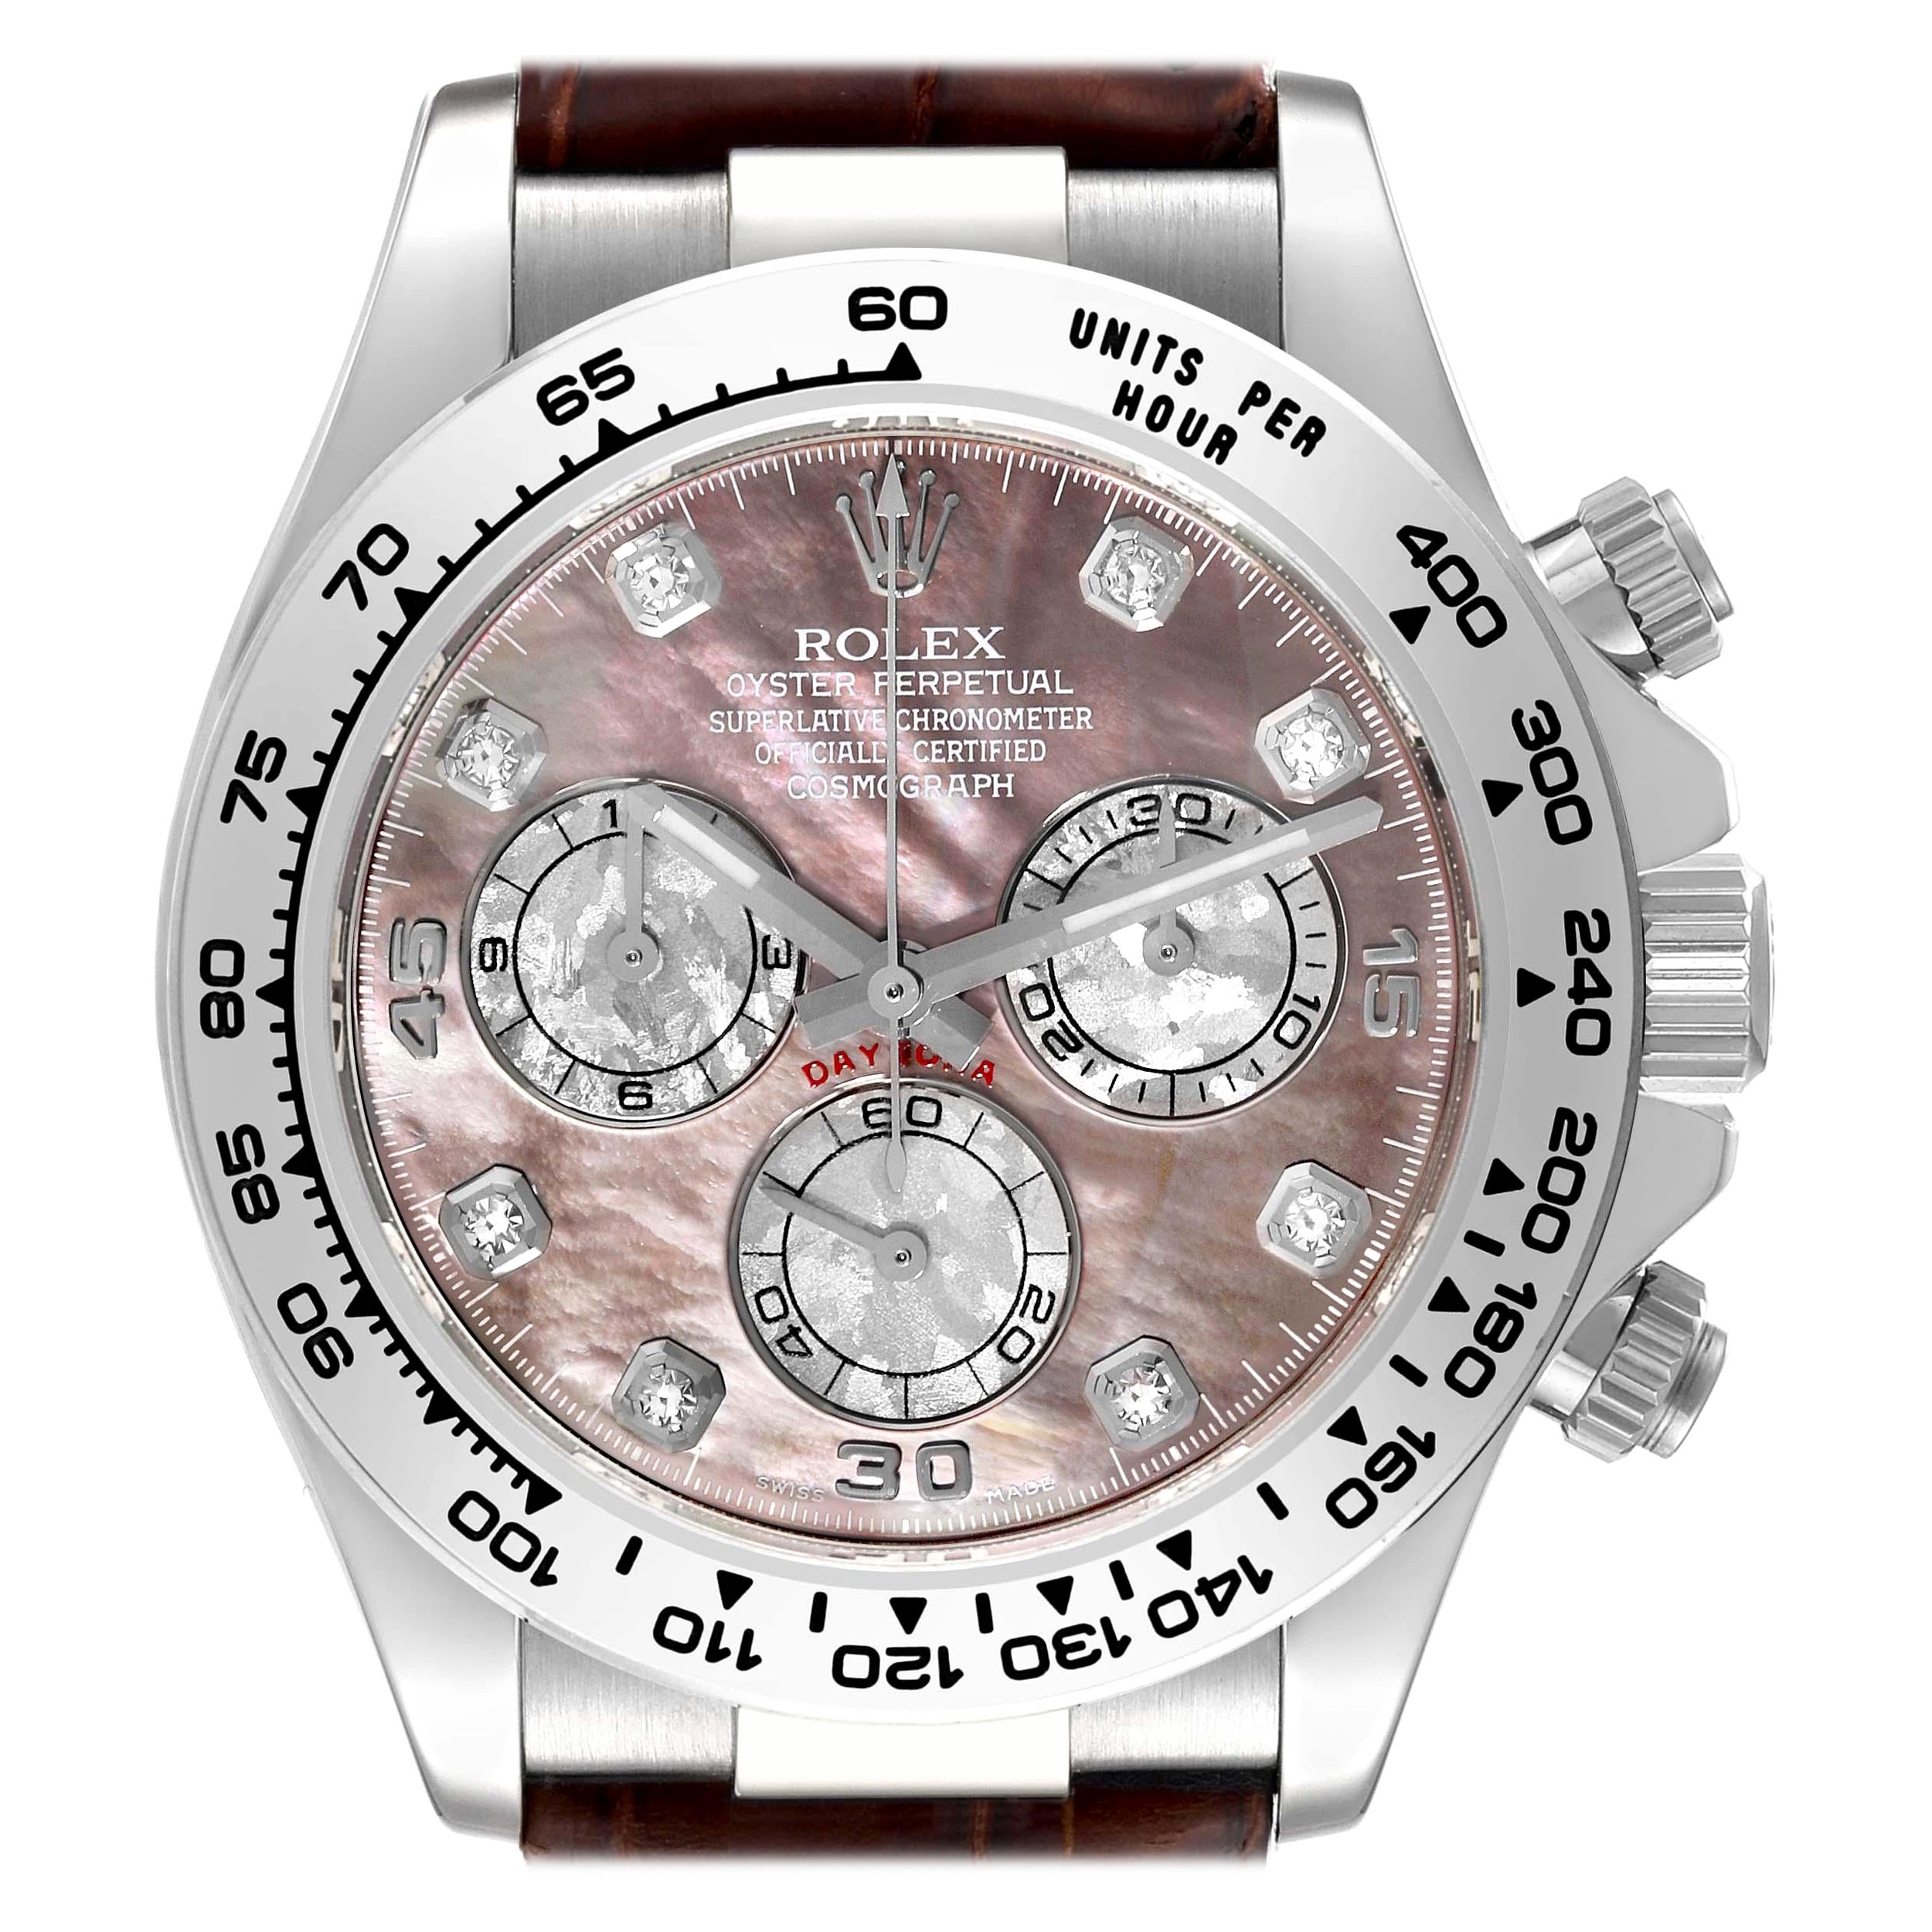 Rolex Daytona White Gold Mother Of Pearl Diamond Dial Mens Watch 116519 Box Card For Sale